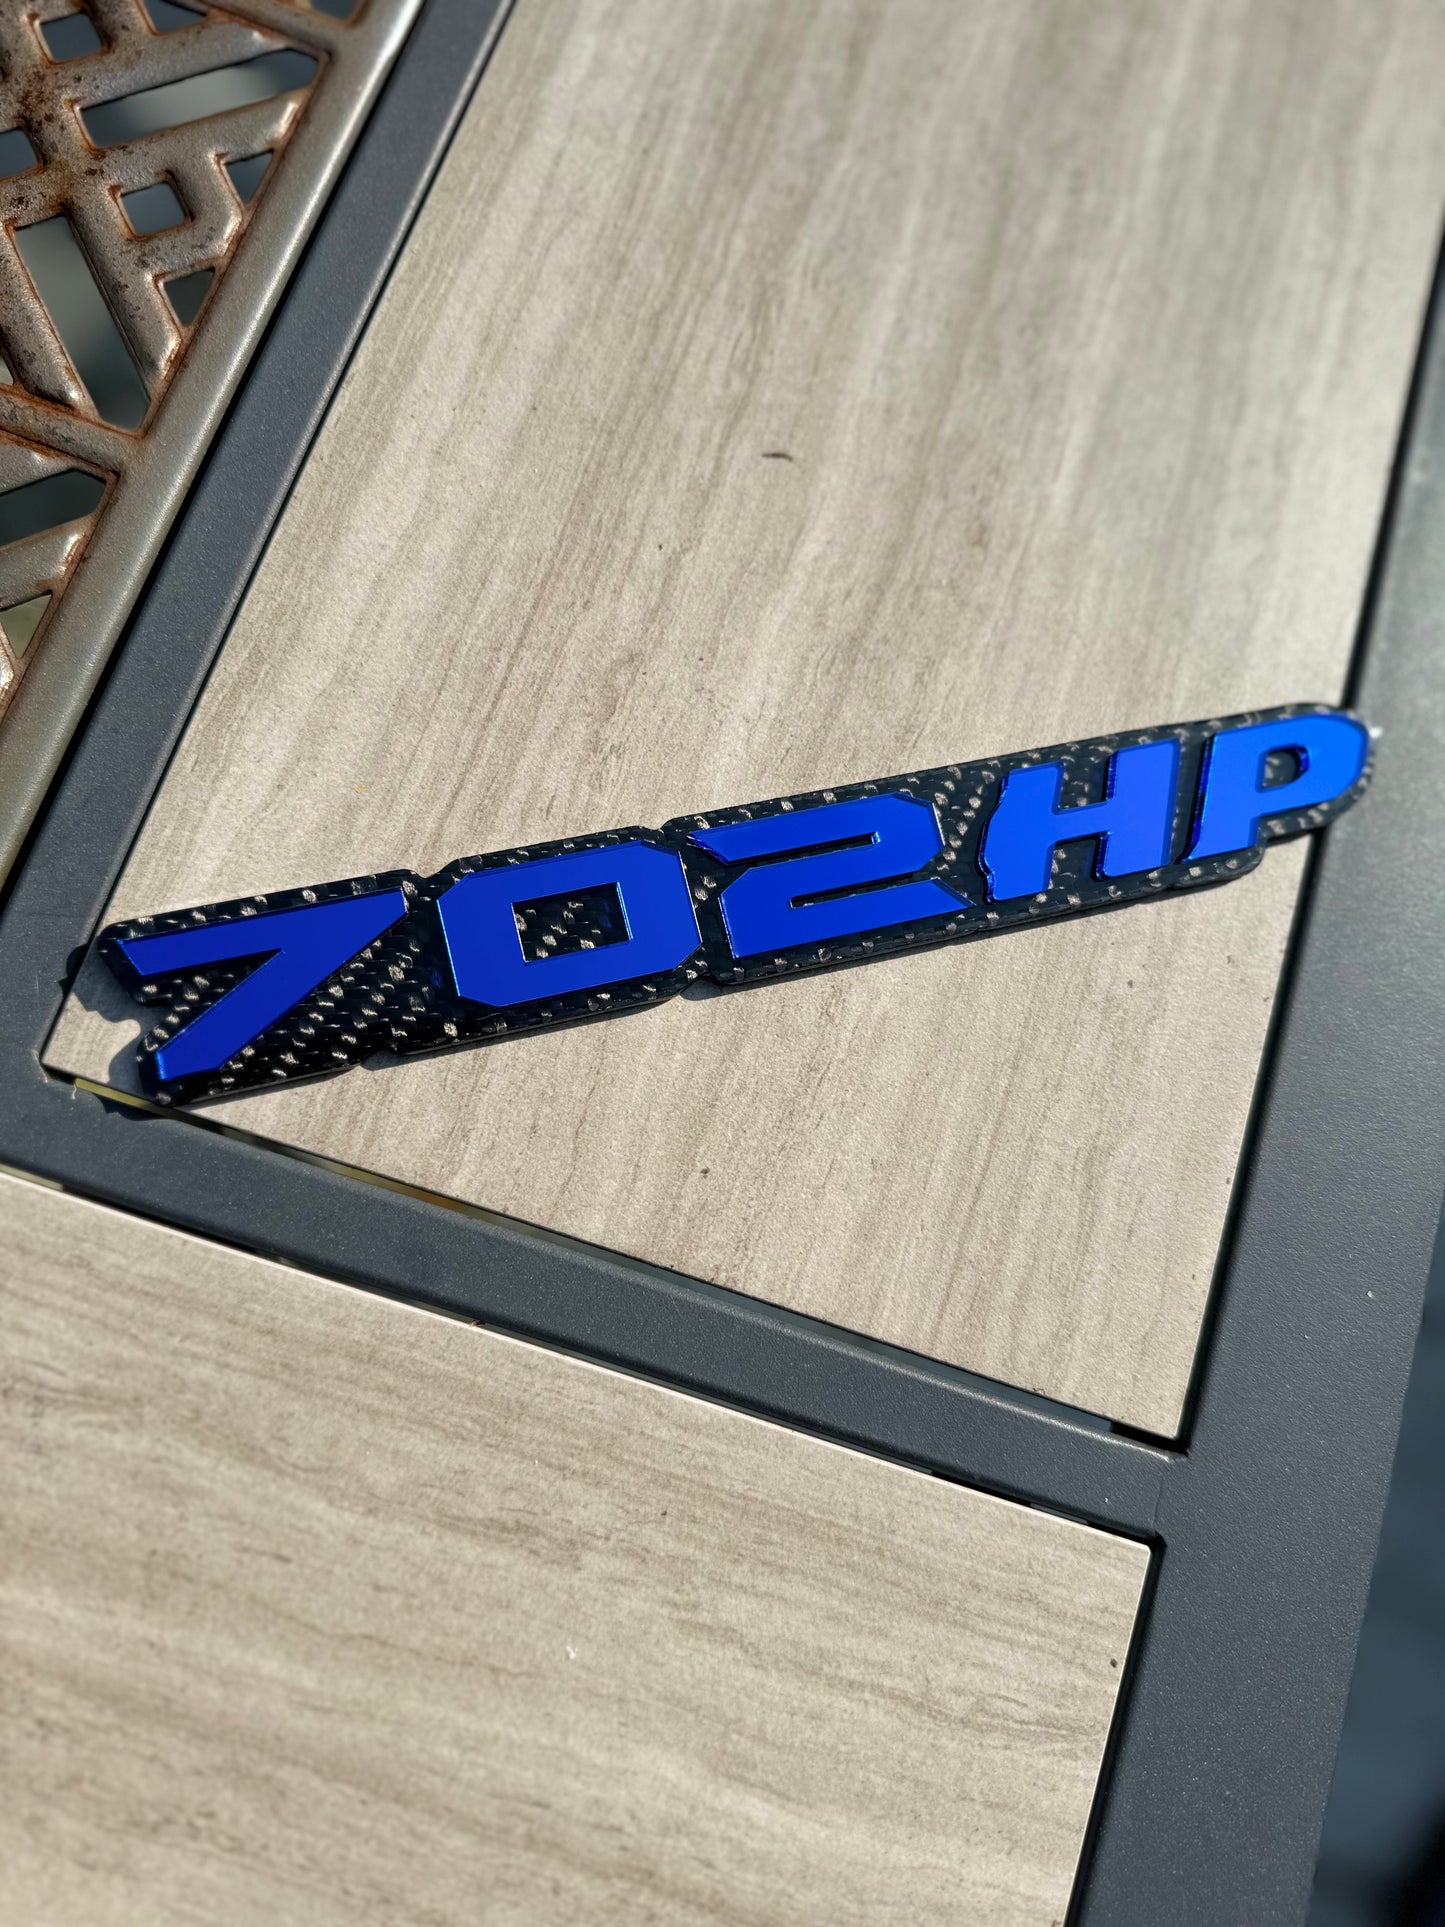 702HP grille badge